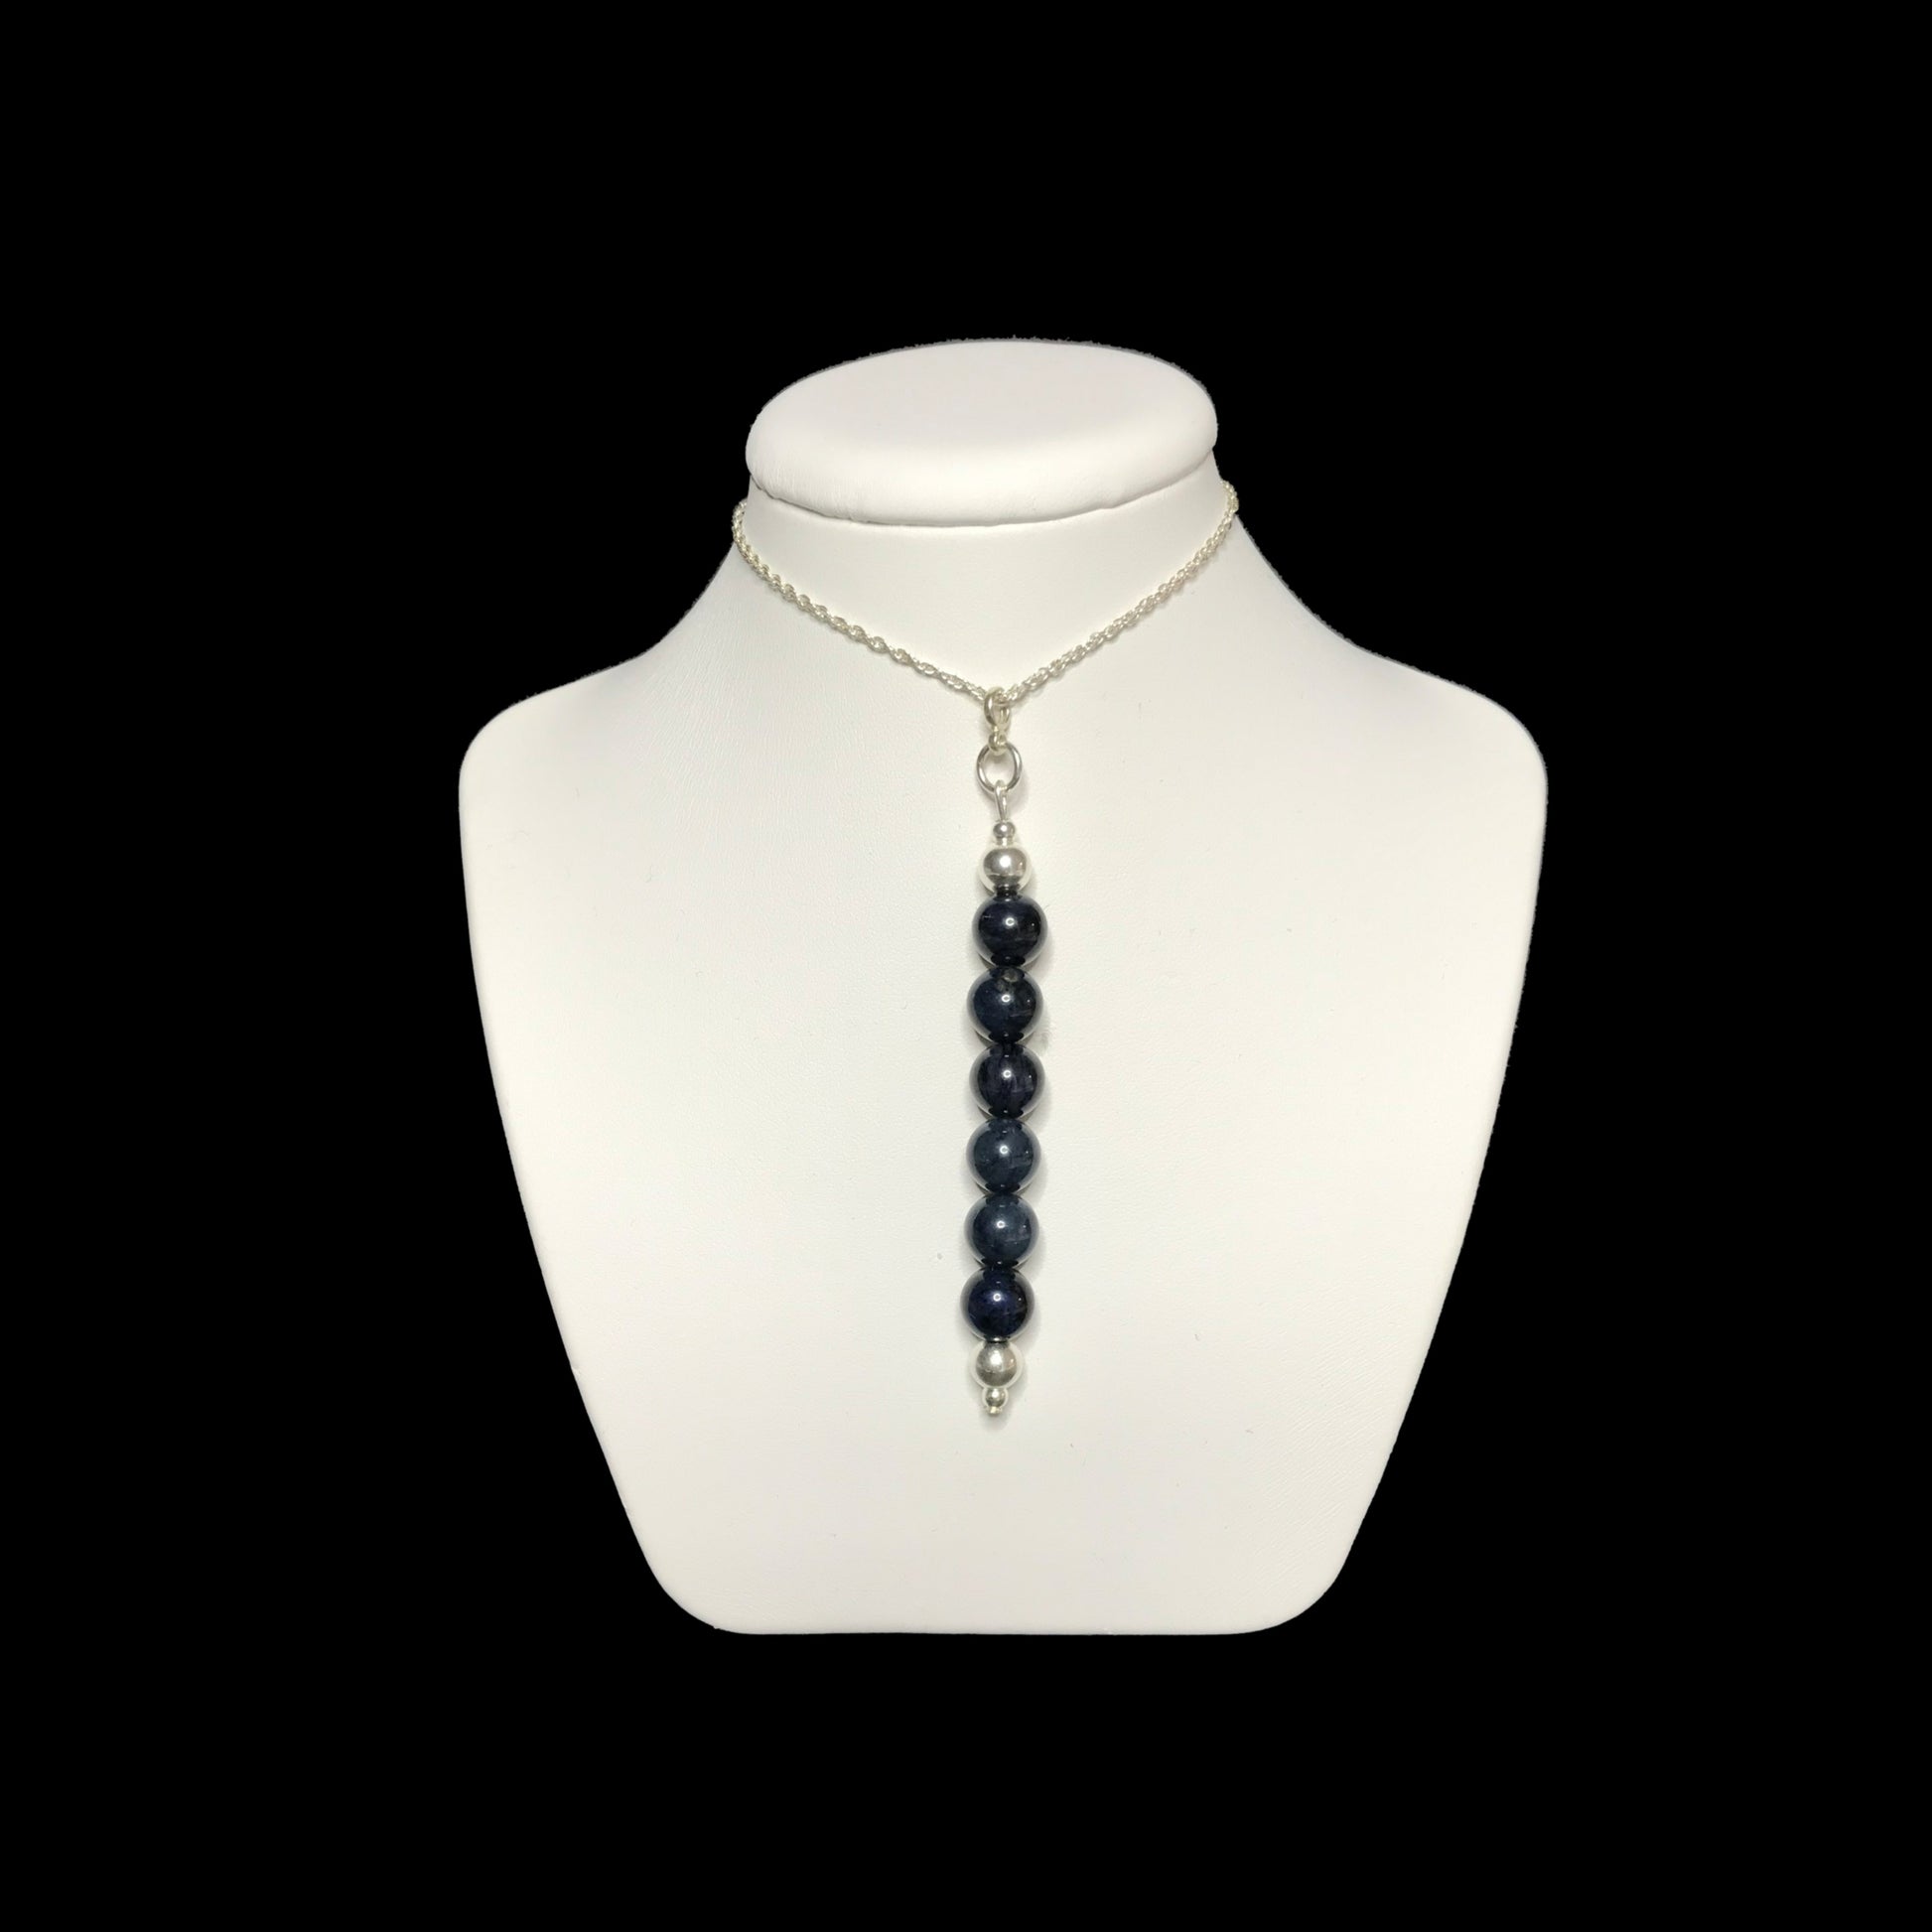 Dumortierite pendant necklace on stand